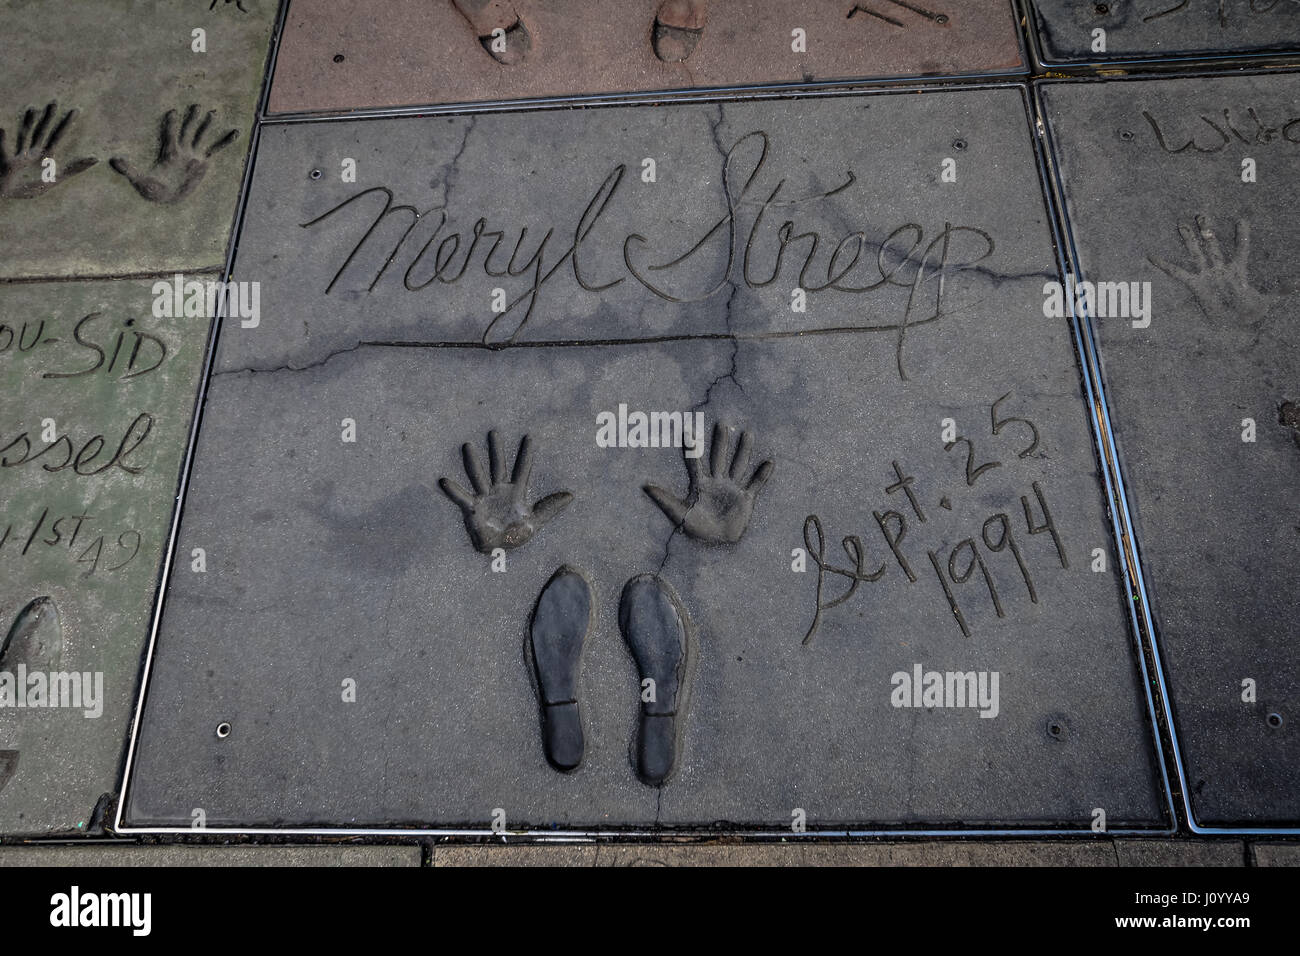 Meryl Streep handprints in Hollywood Boulevard in front of Chinese Theater - Los Angeles California, USA Stock Photo